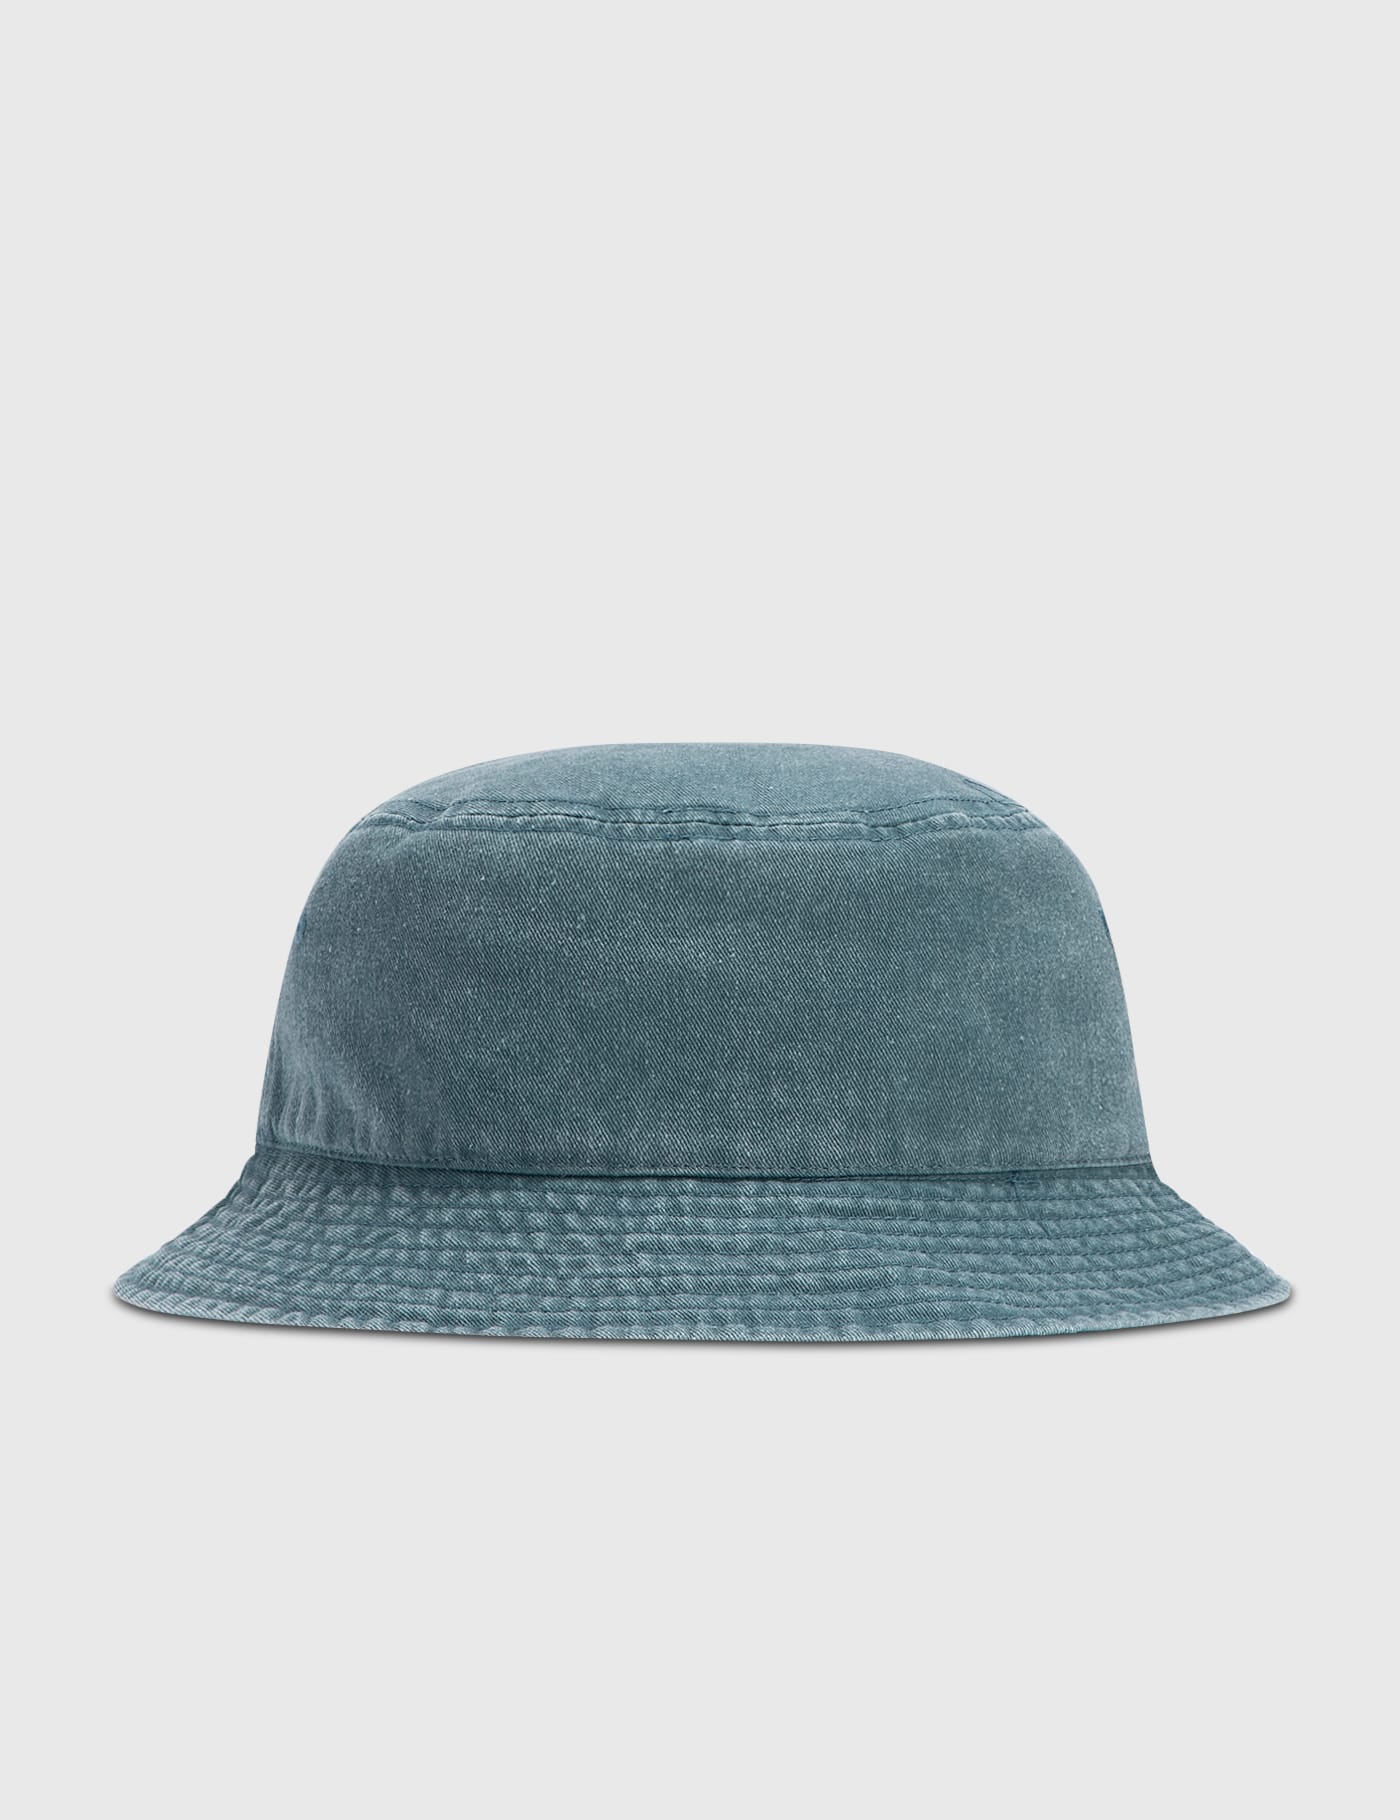 Stussy - Washed Stock Bucket Hat | HBX - Globally Curated Fashion 